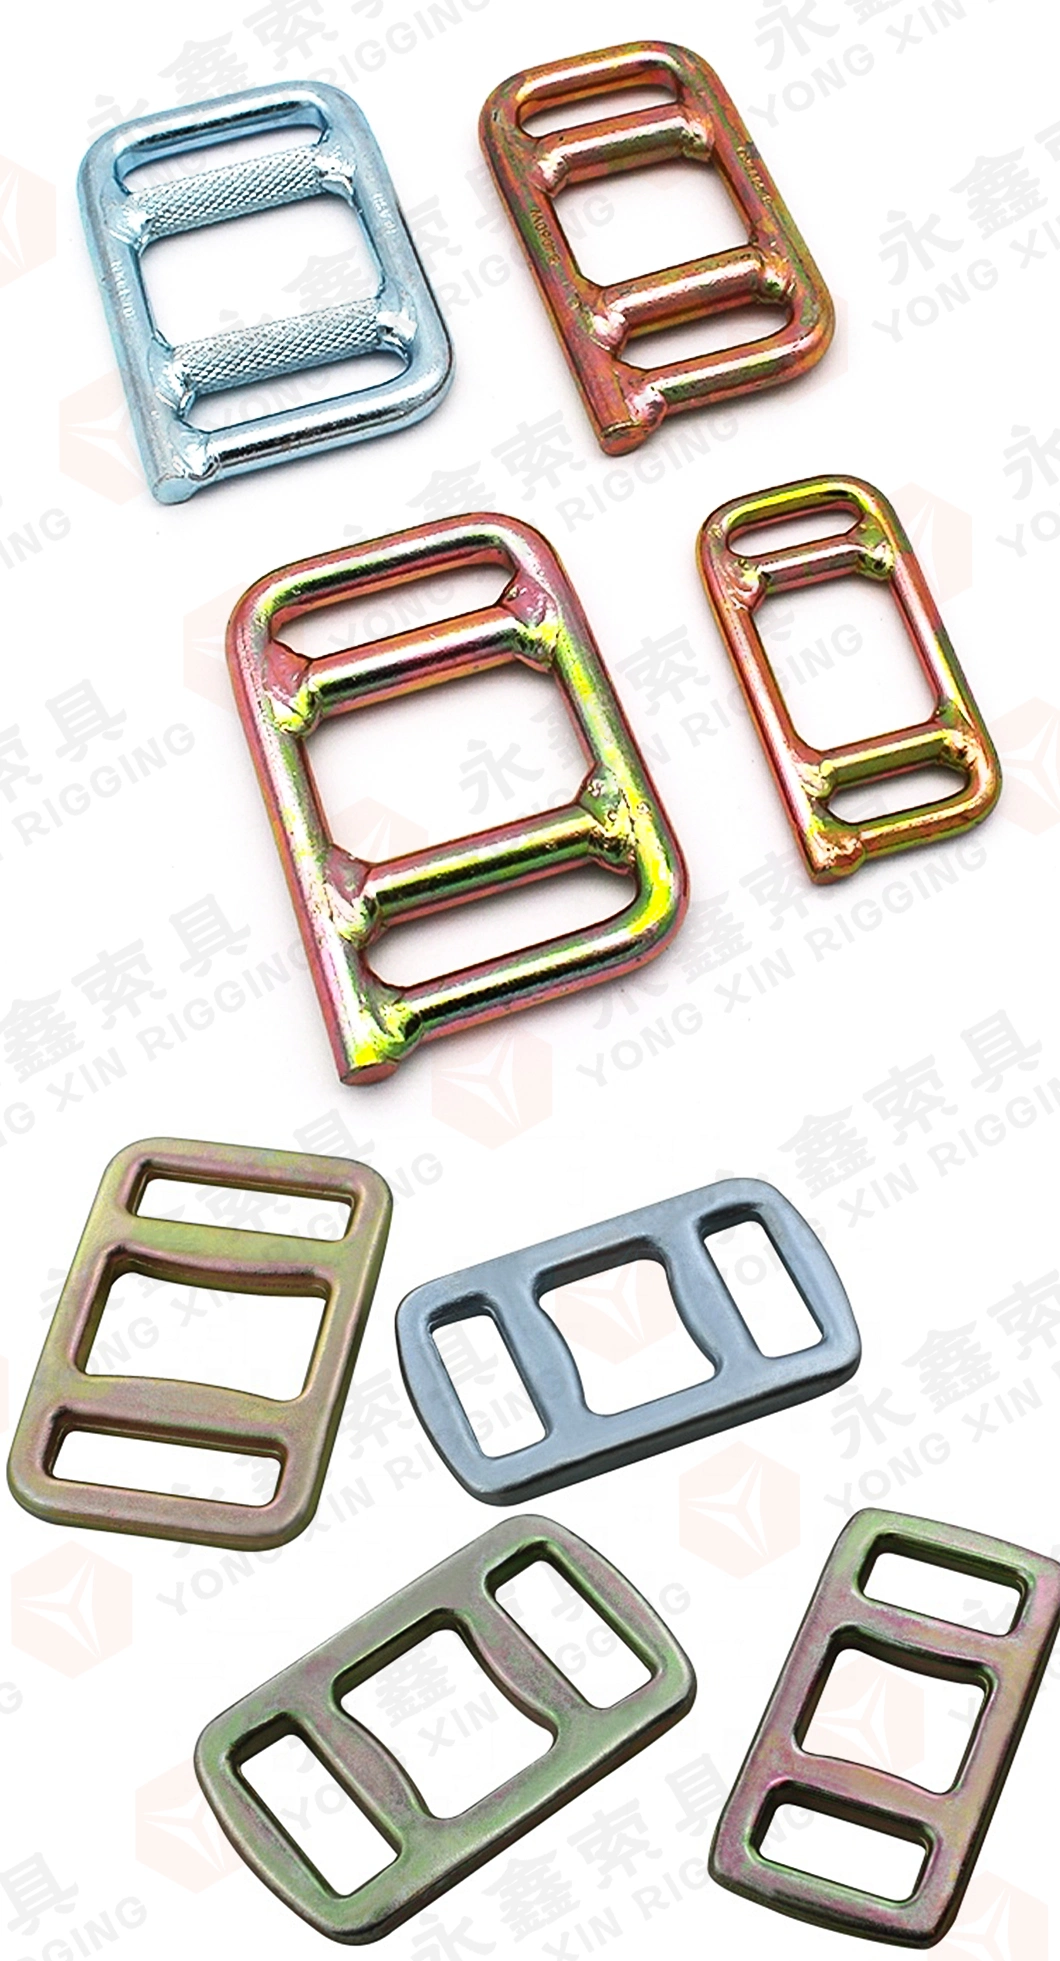 Forged One Way Lashing Buckle 40mm Belt Buckle